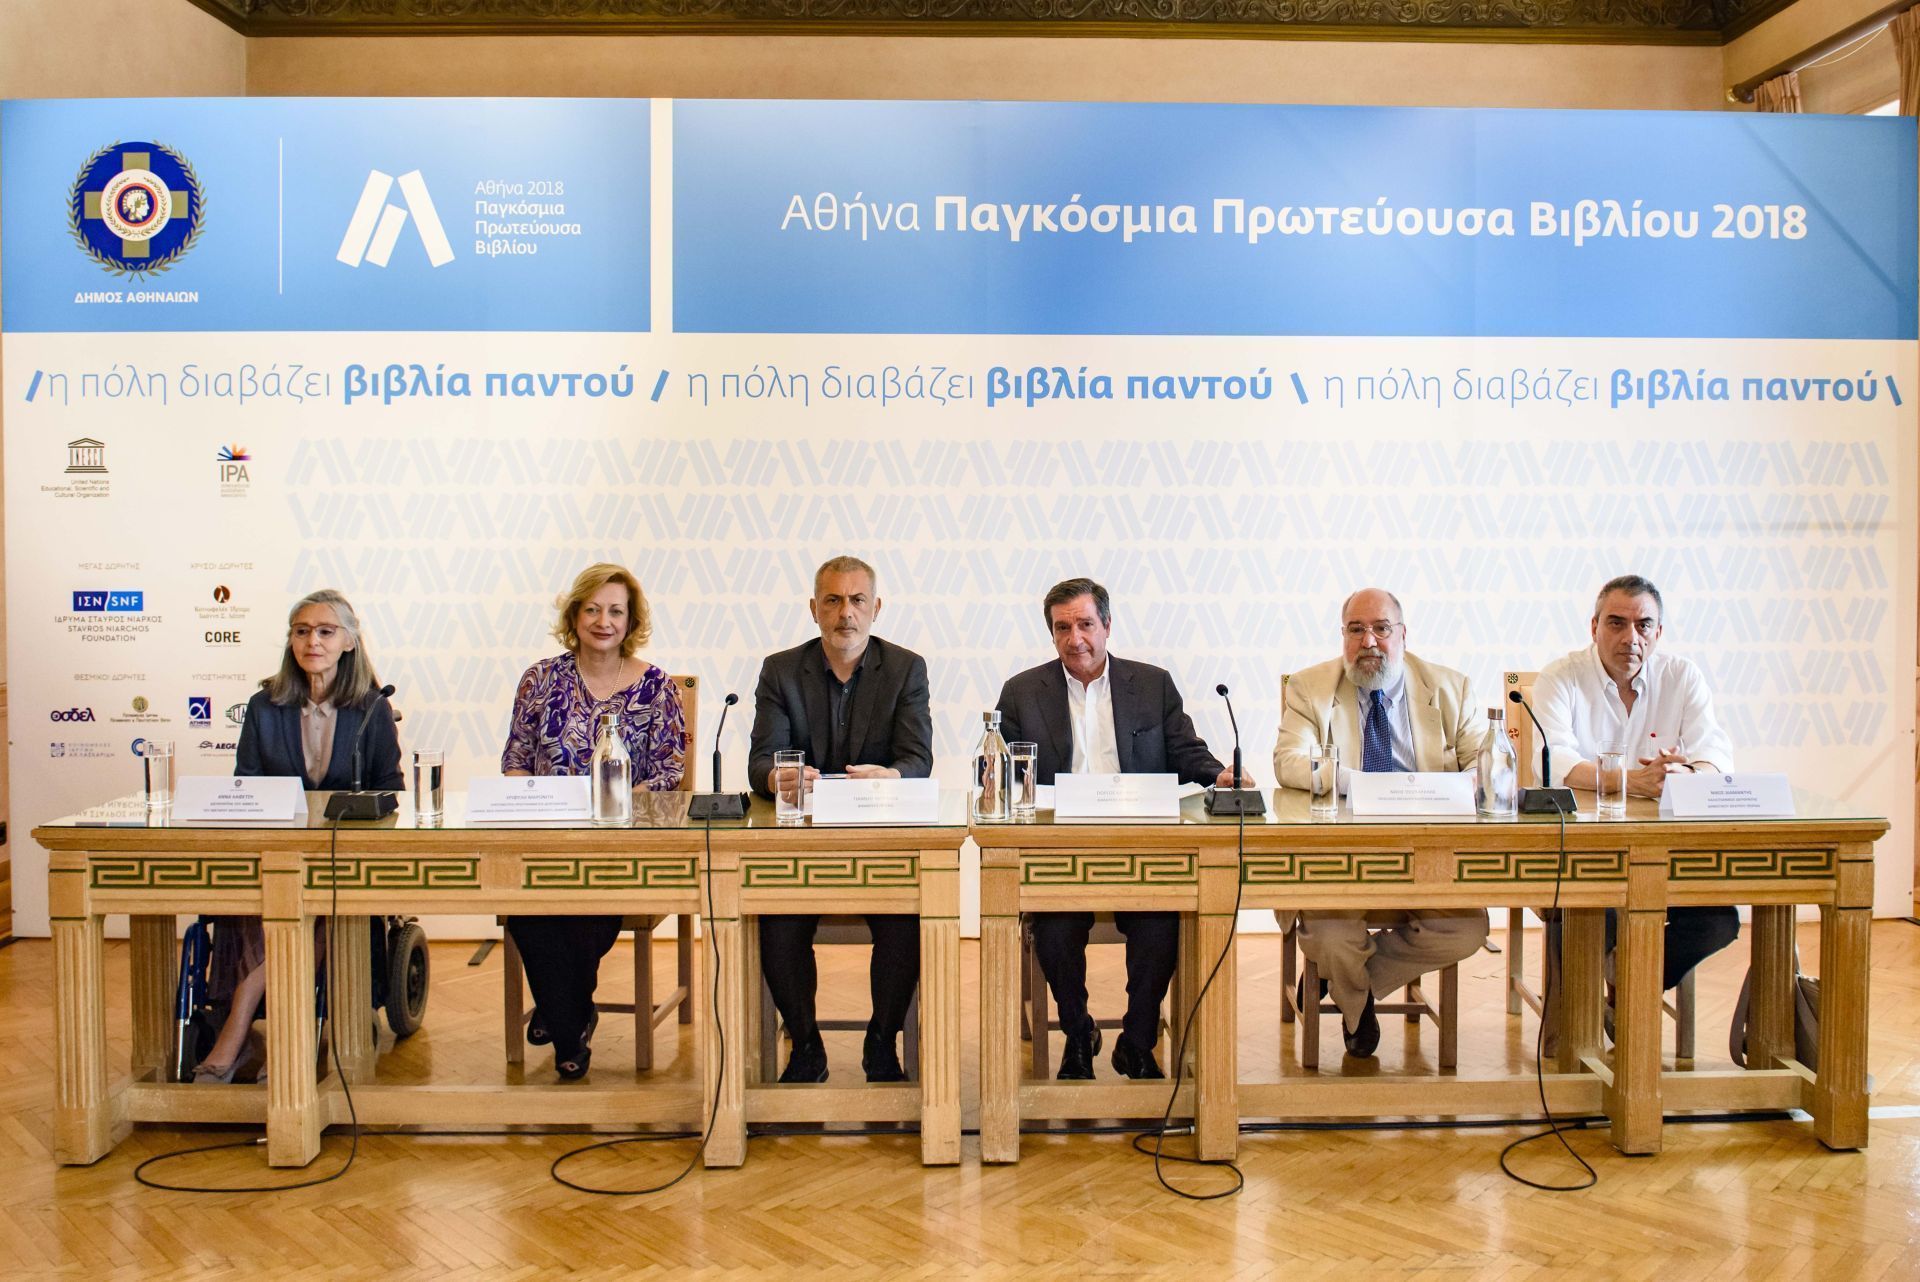 The Mayor of Piraeus Yiannis Moralis and the Mayor of Athens Giorgos Kaminis during a press conference.